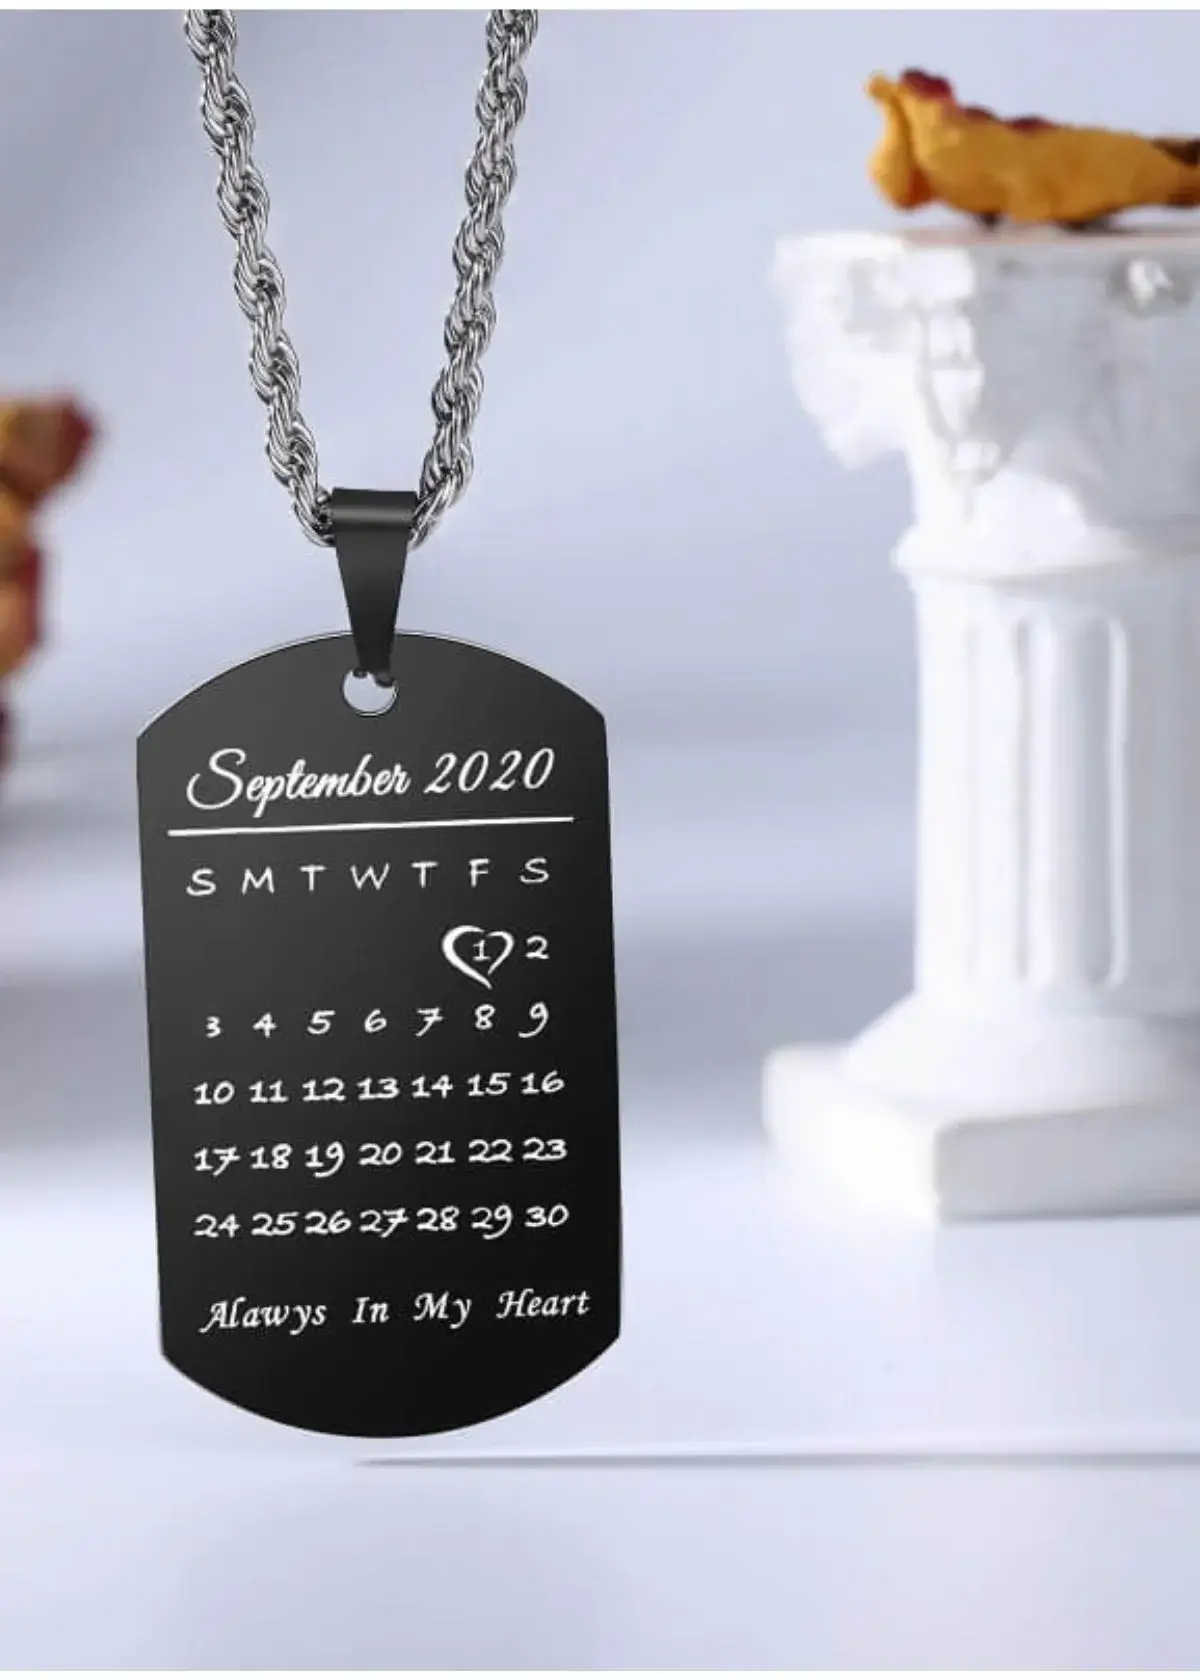 What is a calendar necklace?